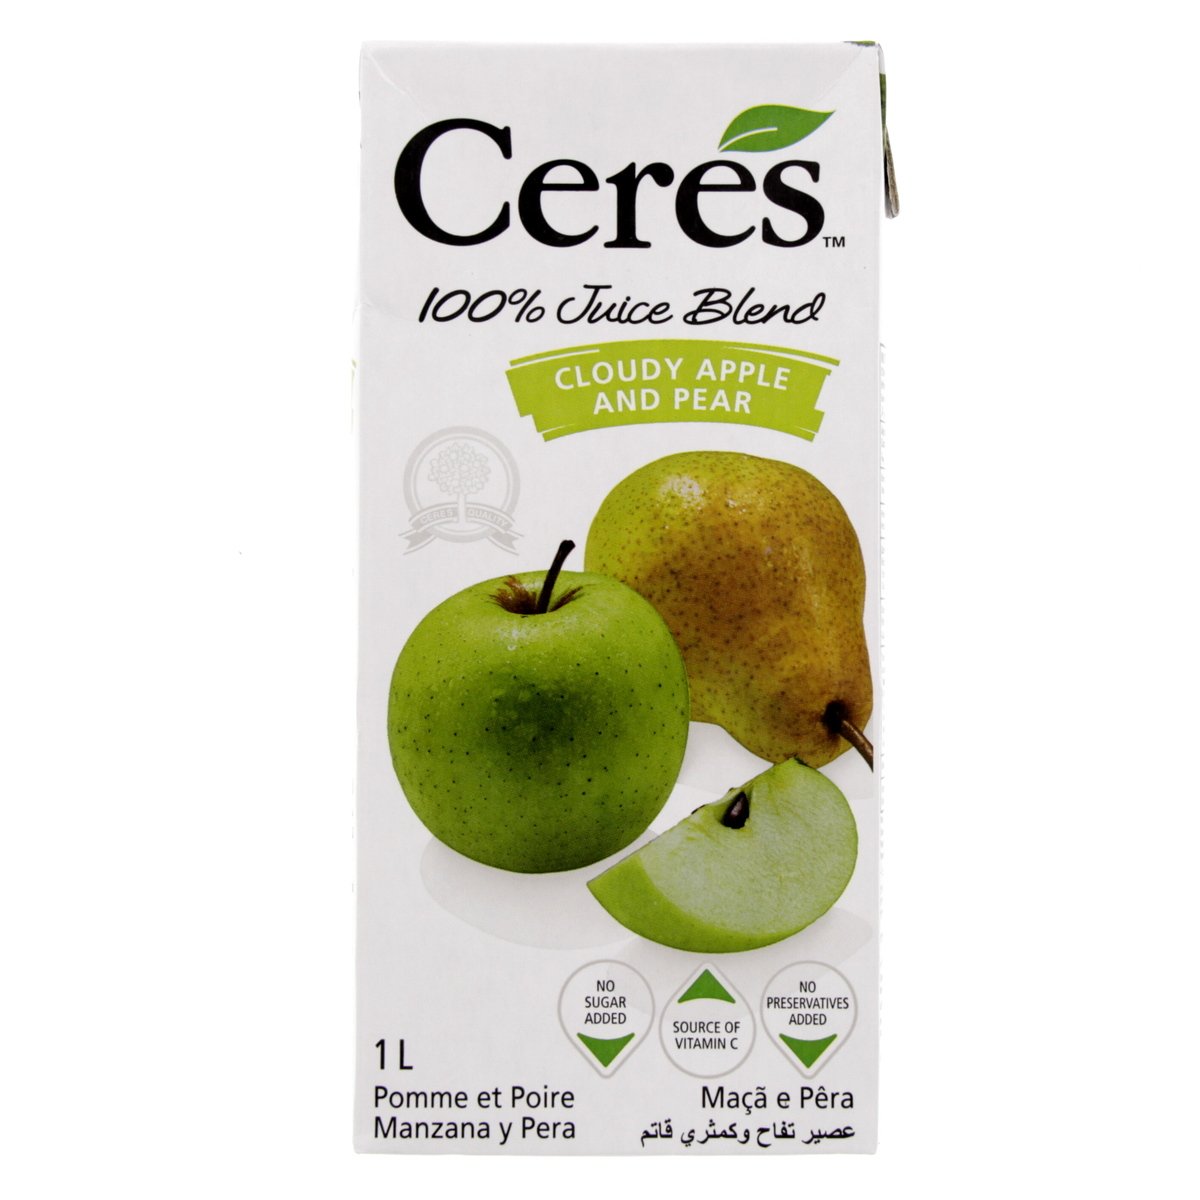 Ceres 100% Juice Blend Cloudy Apple And Pear 1 Litre